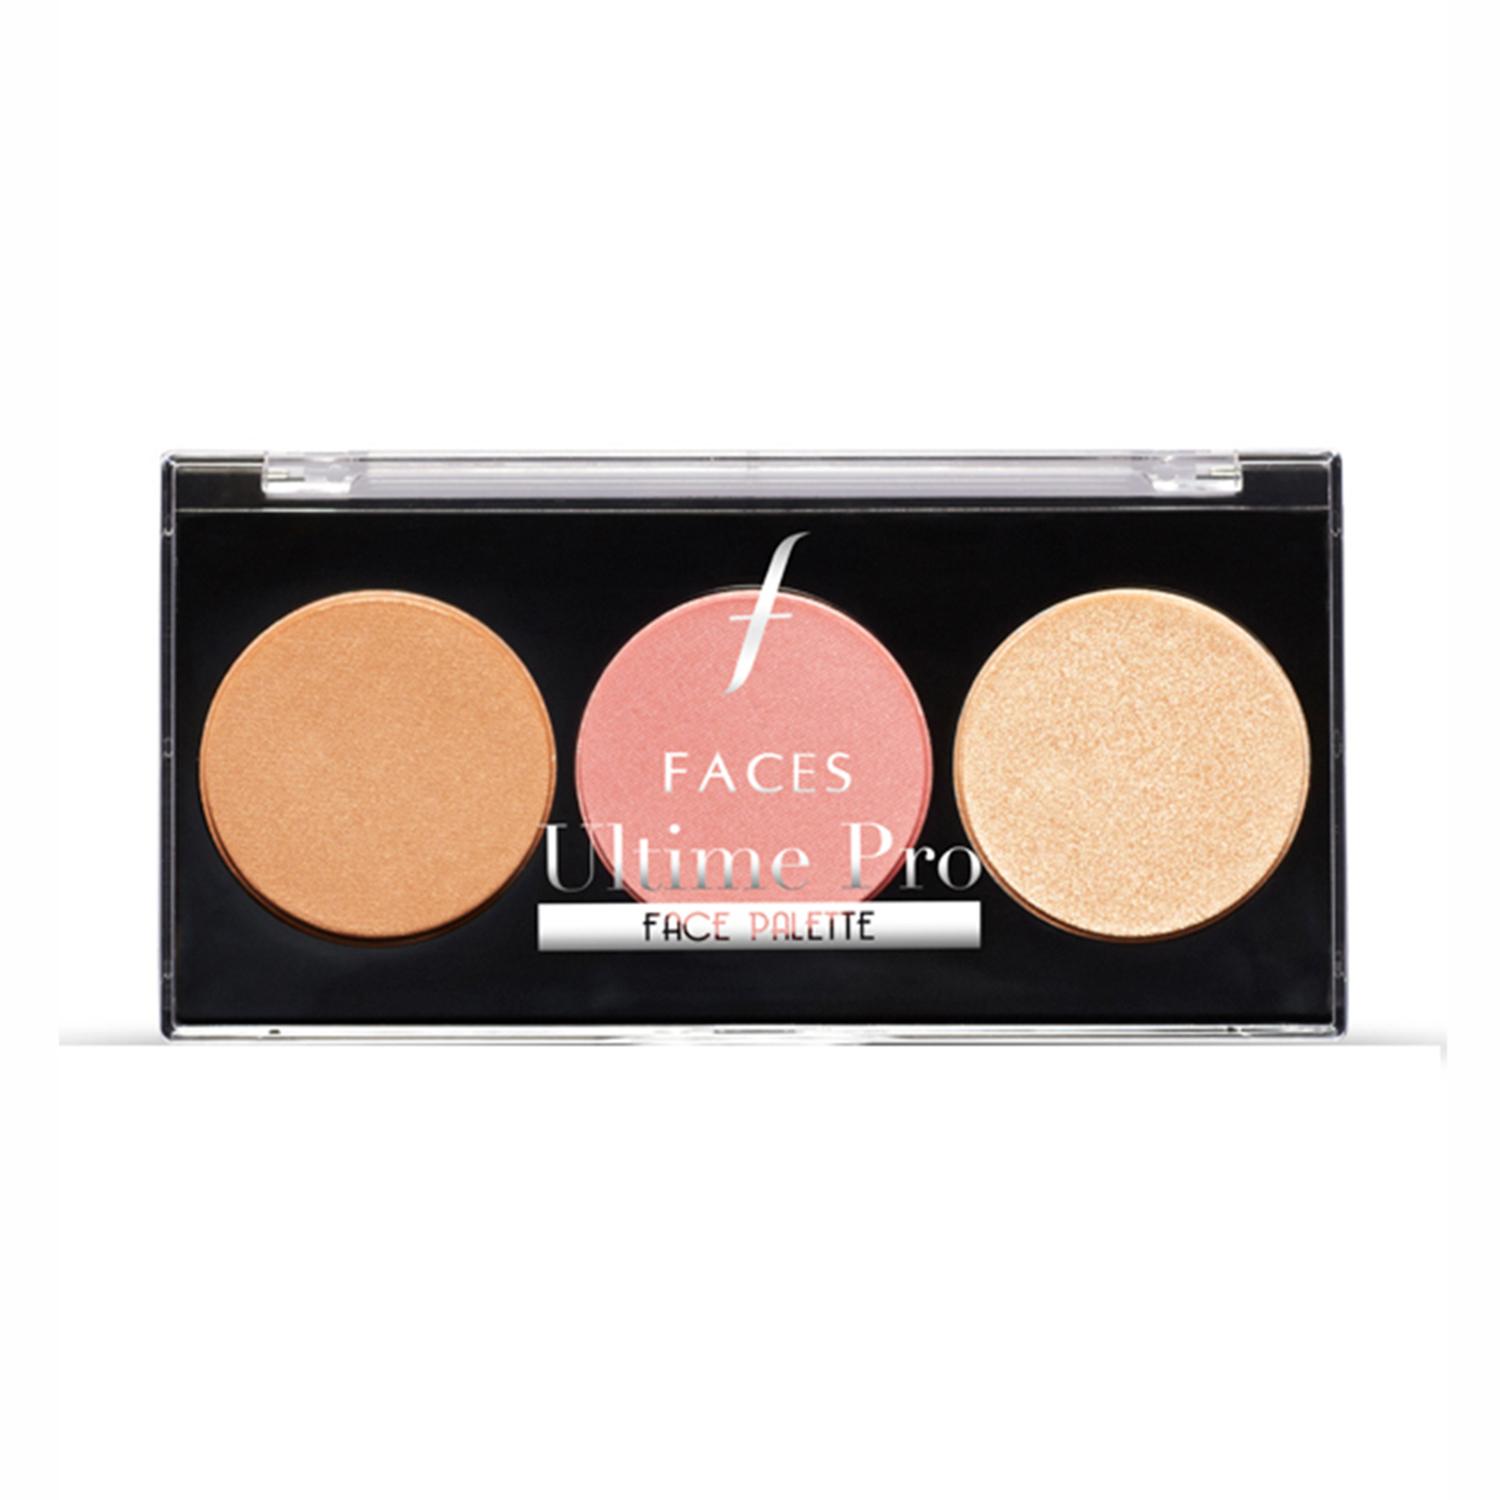 Faces Canada | Faces Canada Ultime Pro Face Palette - Fresh, 3in1 Bronzer+Highlighter+Blush, Shimmer Finish (12 g)